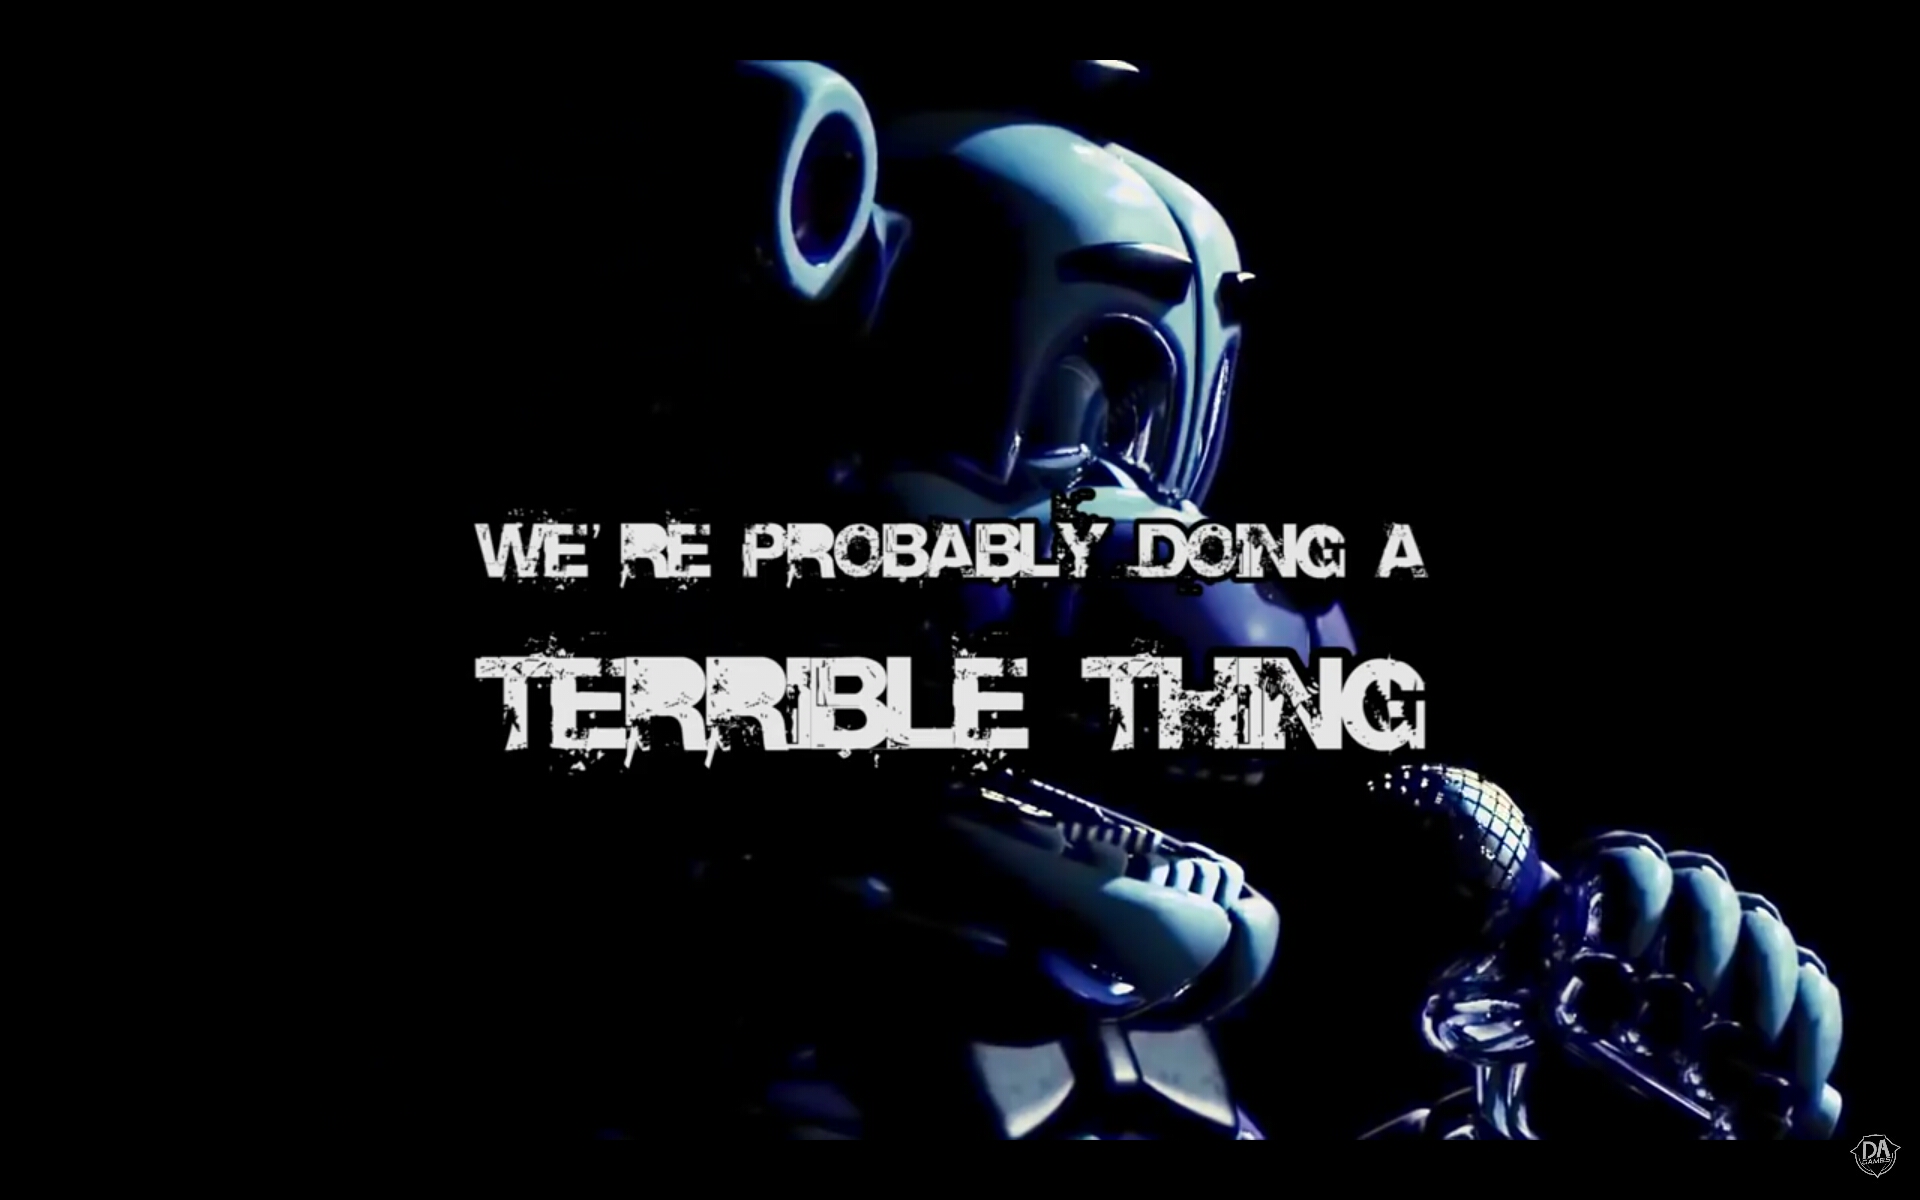 Need text font for "we're probably doing a terrible thing"